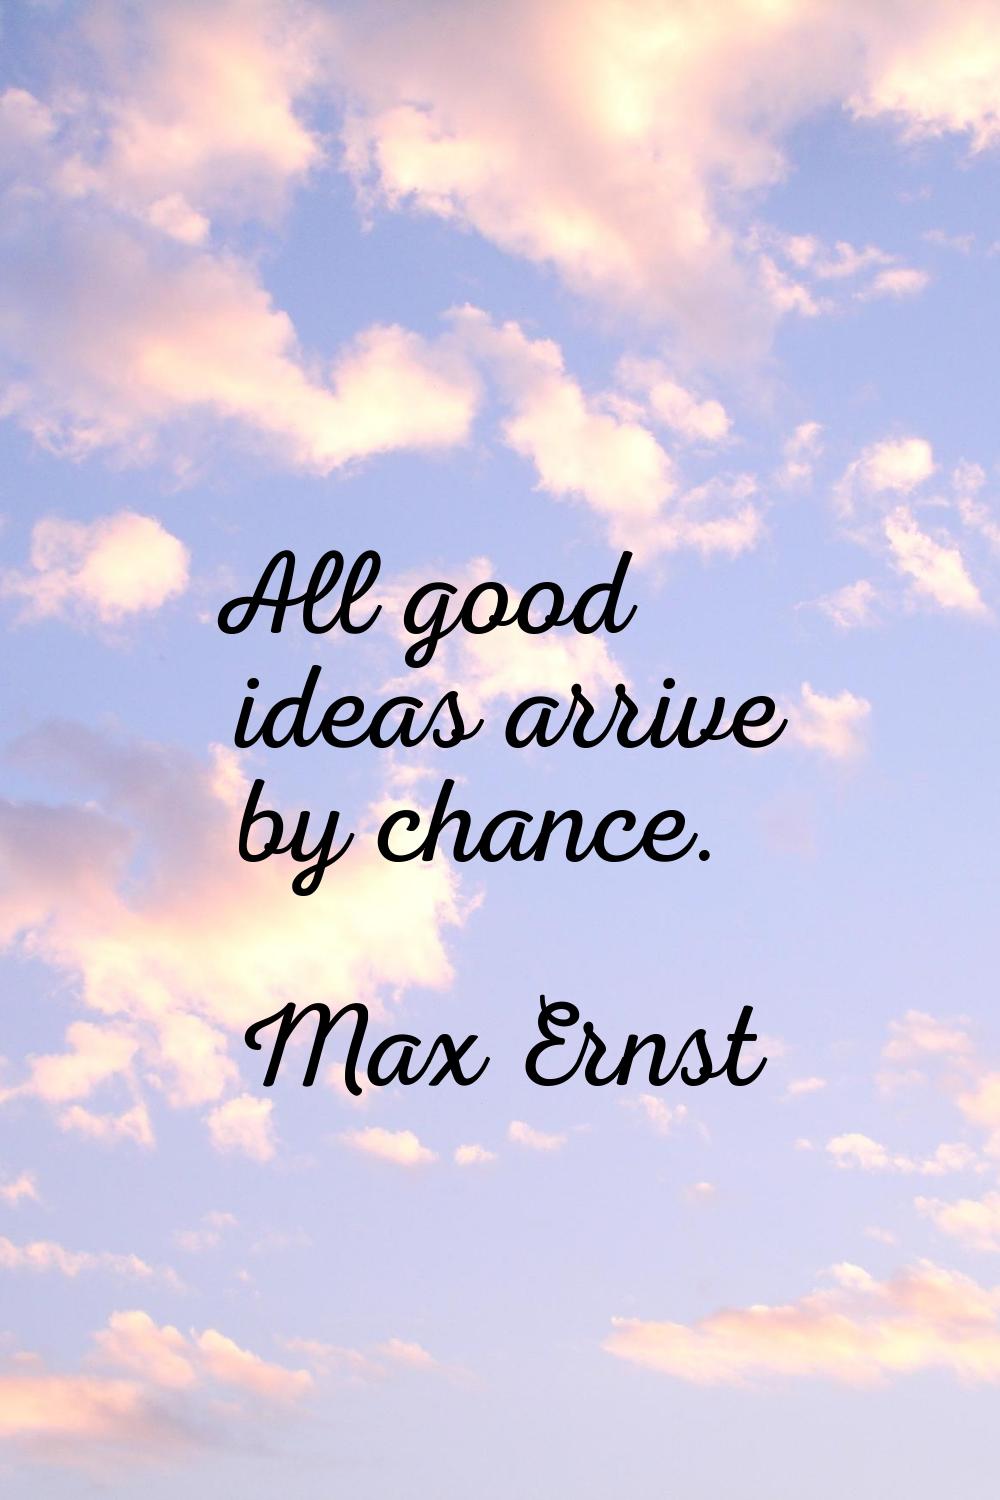 All good ideas arrive by chance.